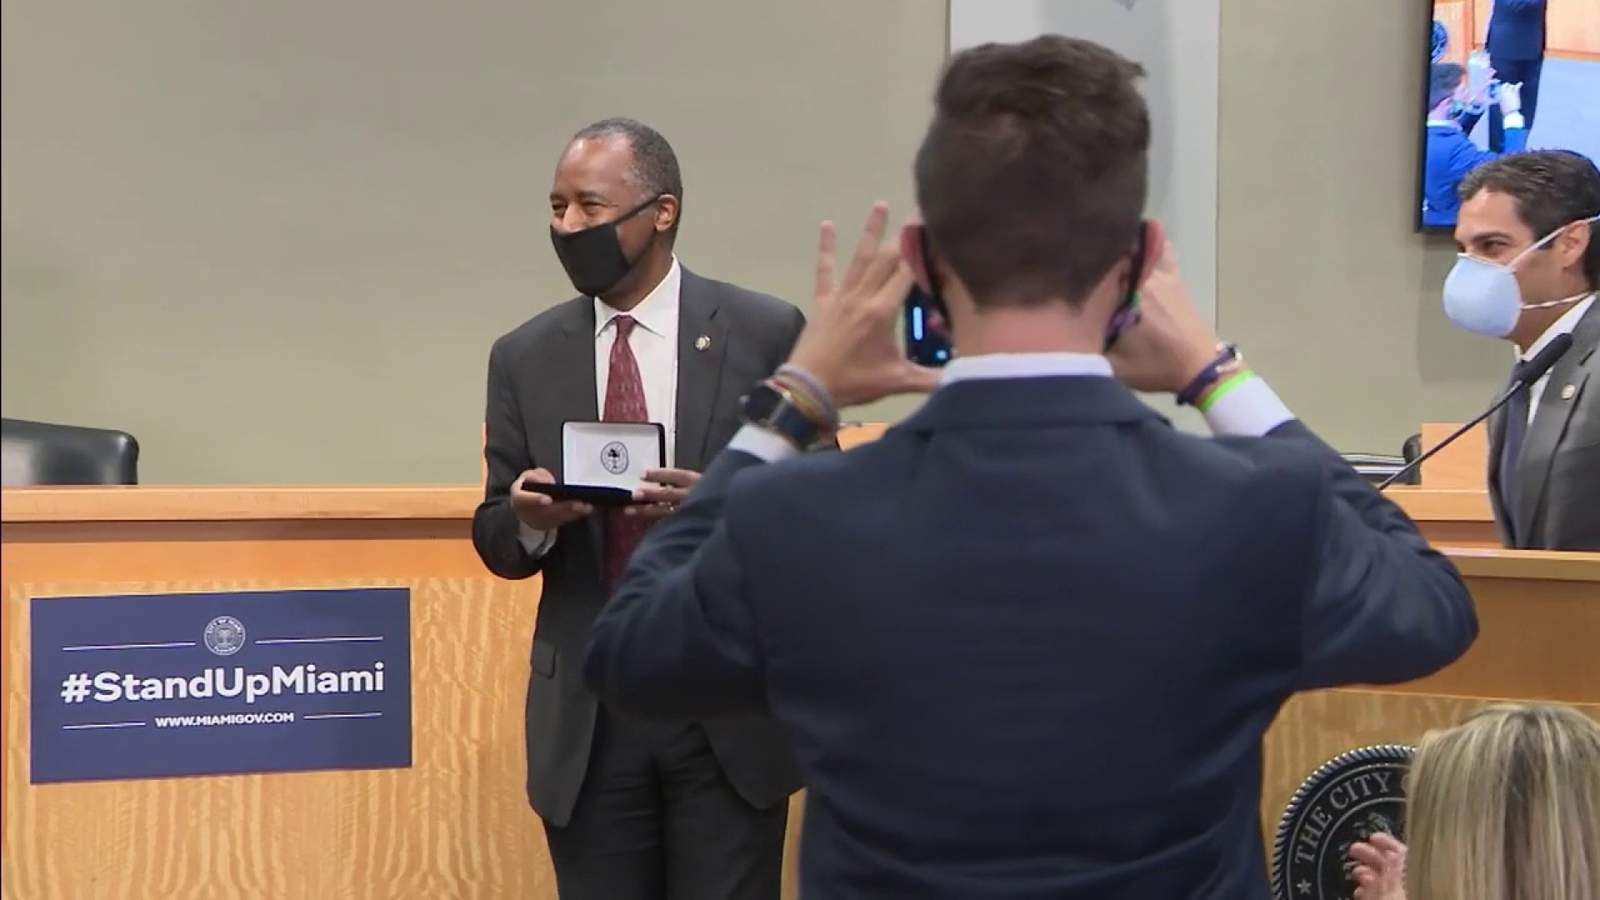 Ben Carson gets key to Miami after city received $3.2 million for small businesses and low-income tenants